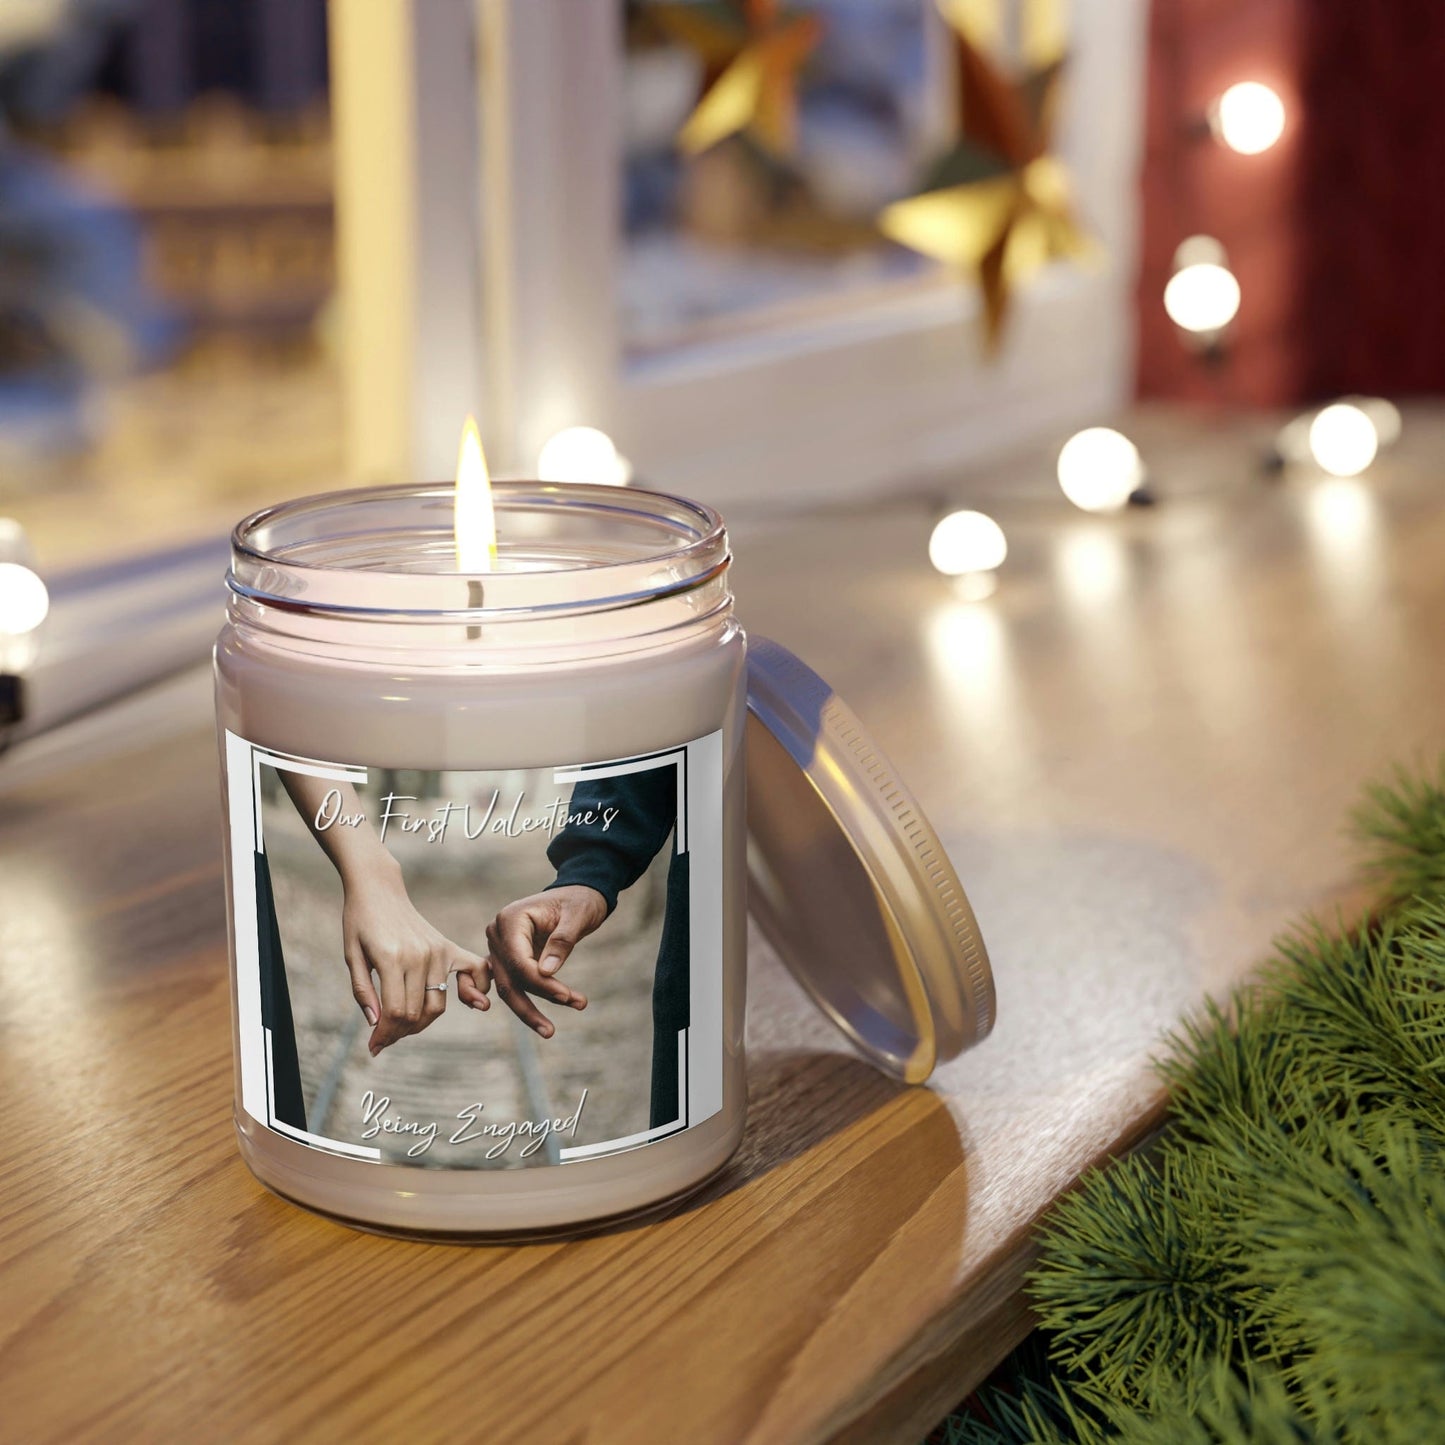 Custom Photo Candle - Personalised Scented Soy Gift for Valentine's Day, Couple, Him or Her, Handmade